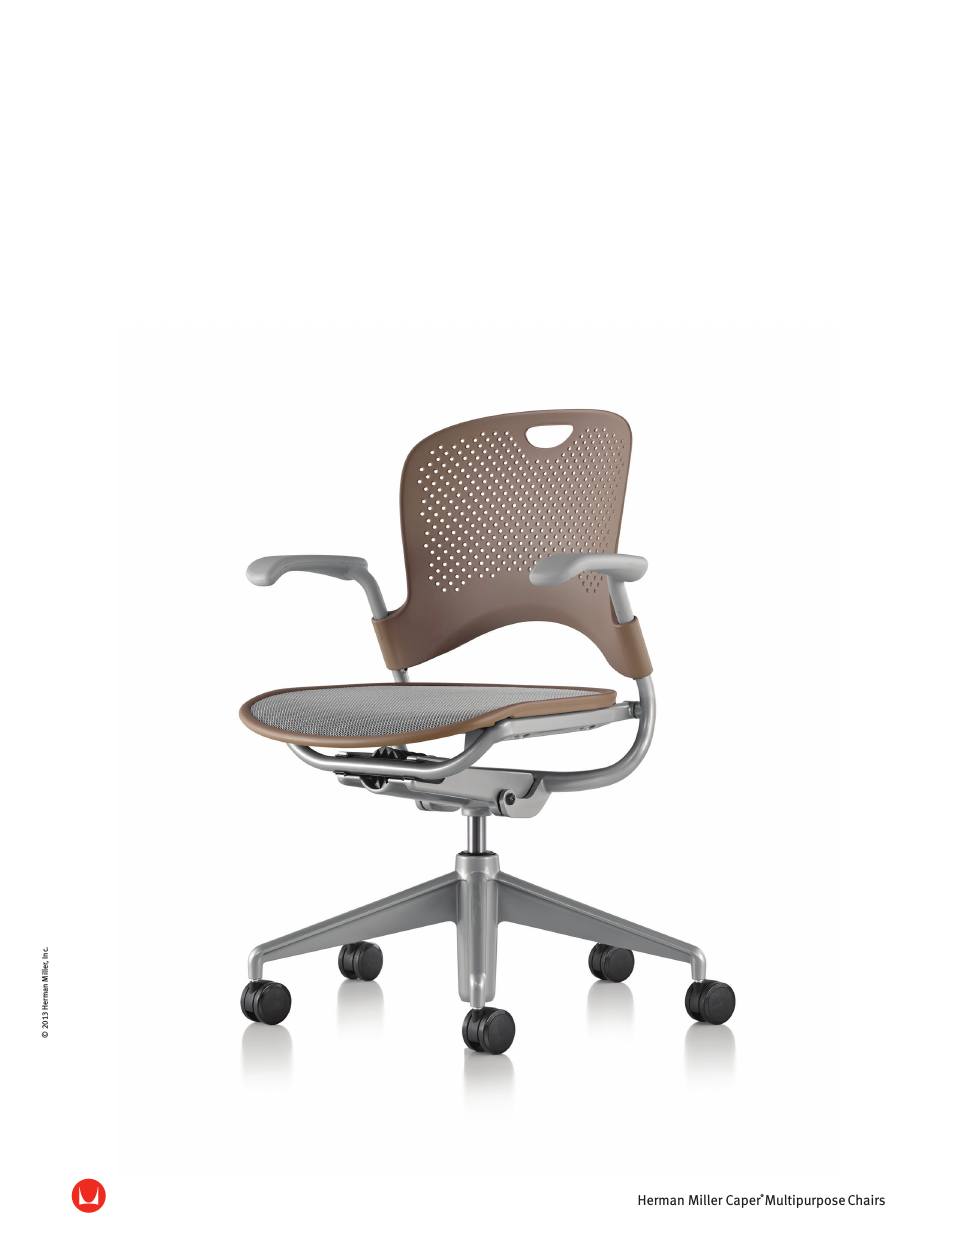 Caper Multipurpose Chair - Product sheet